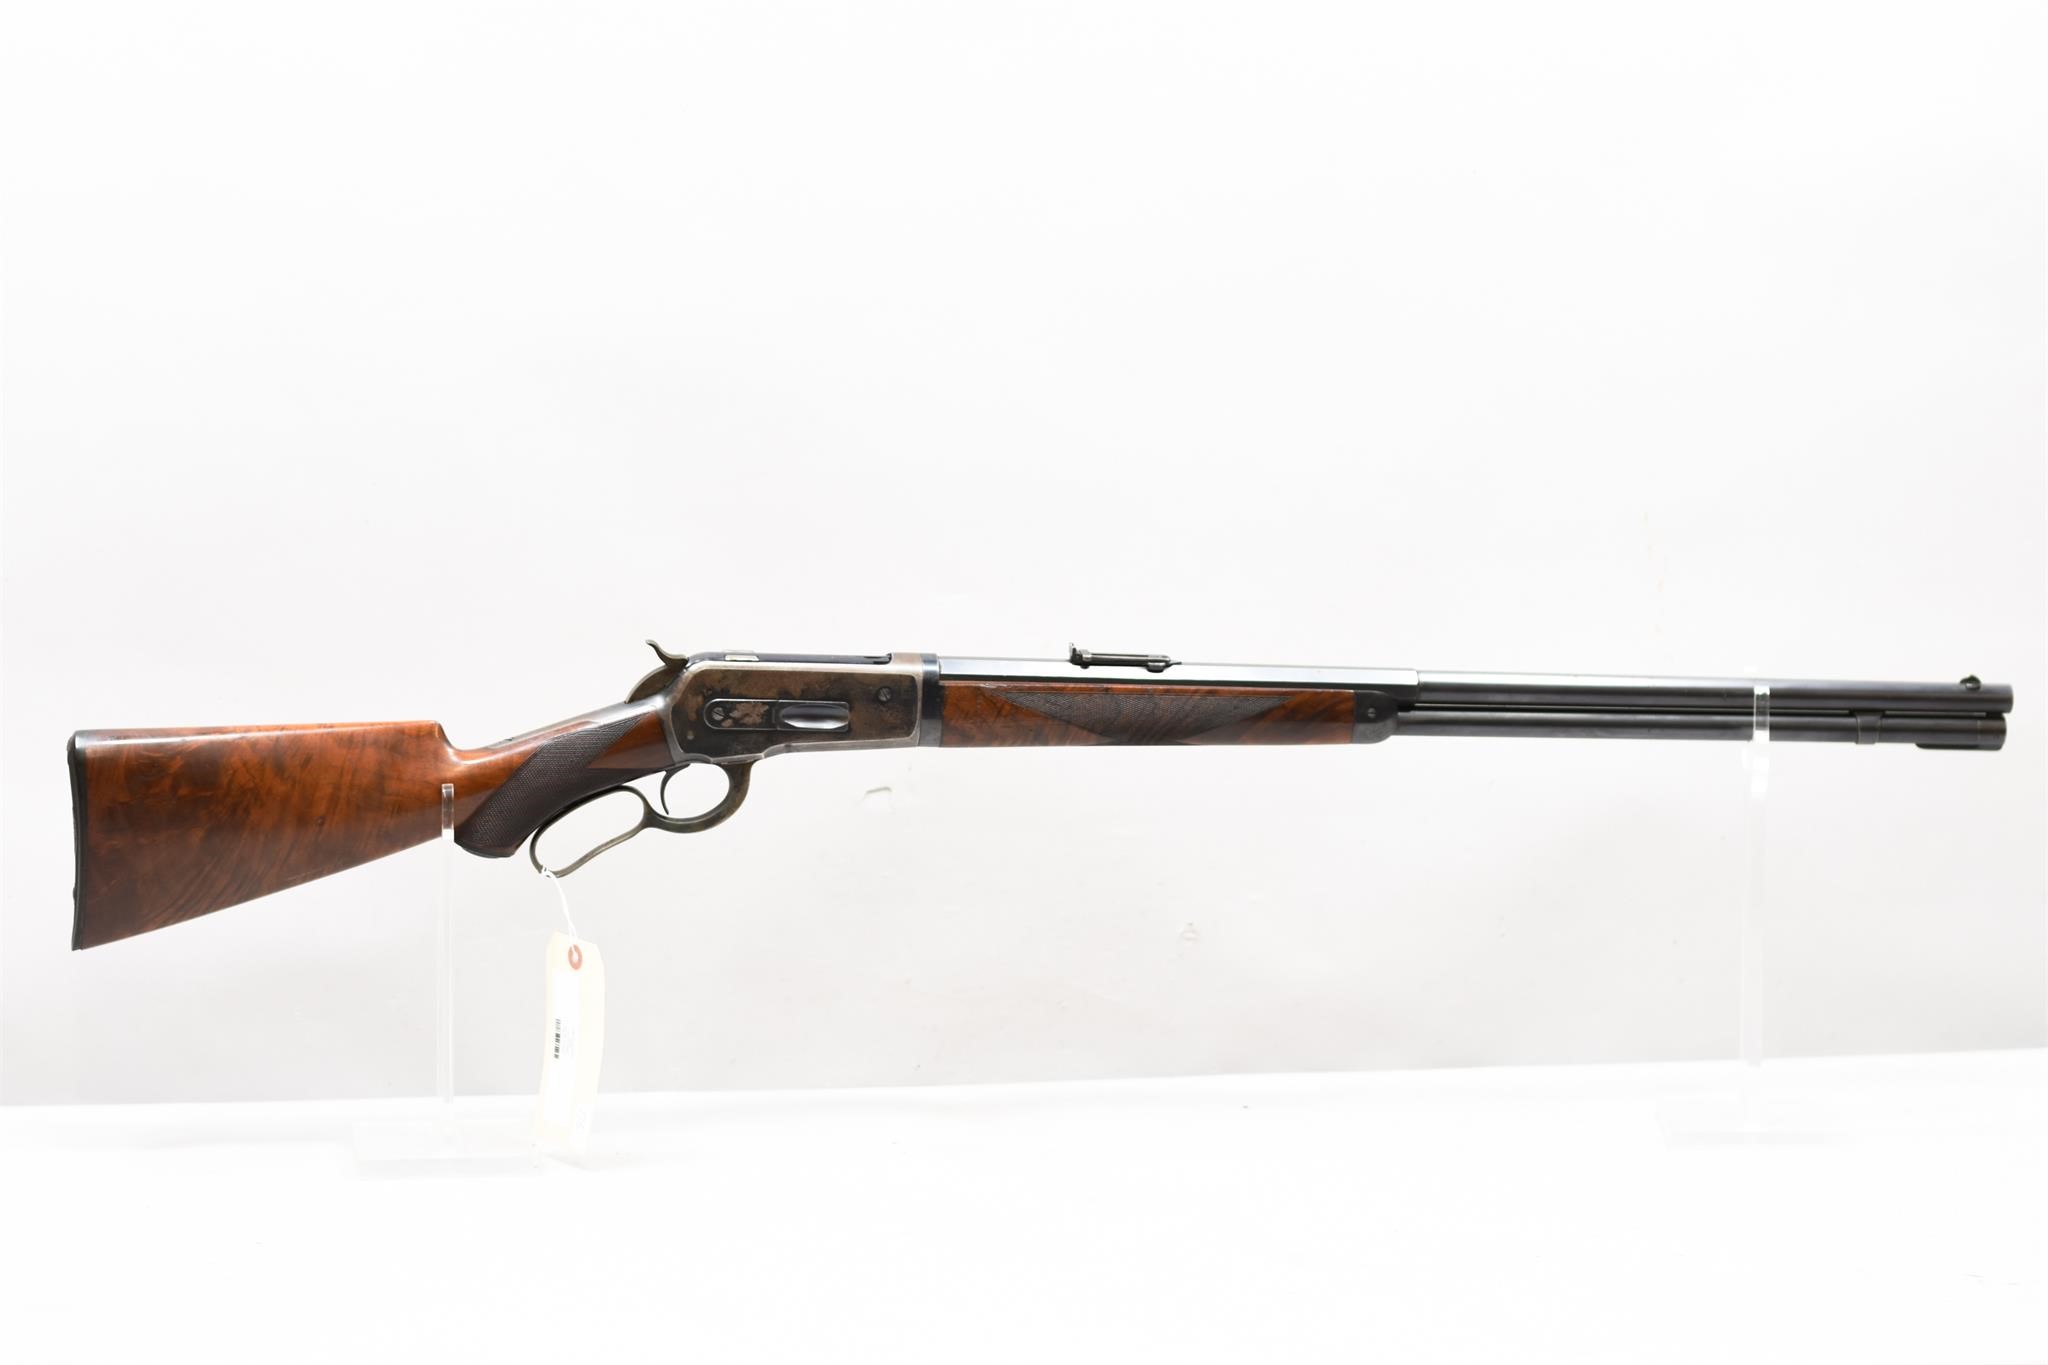 6/19/2021 Firearms & Sporting Goods Auction